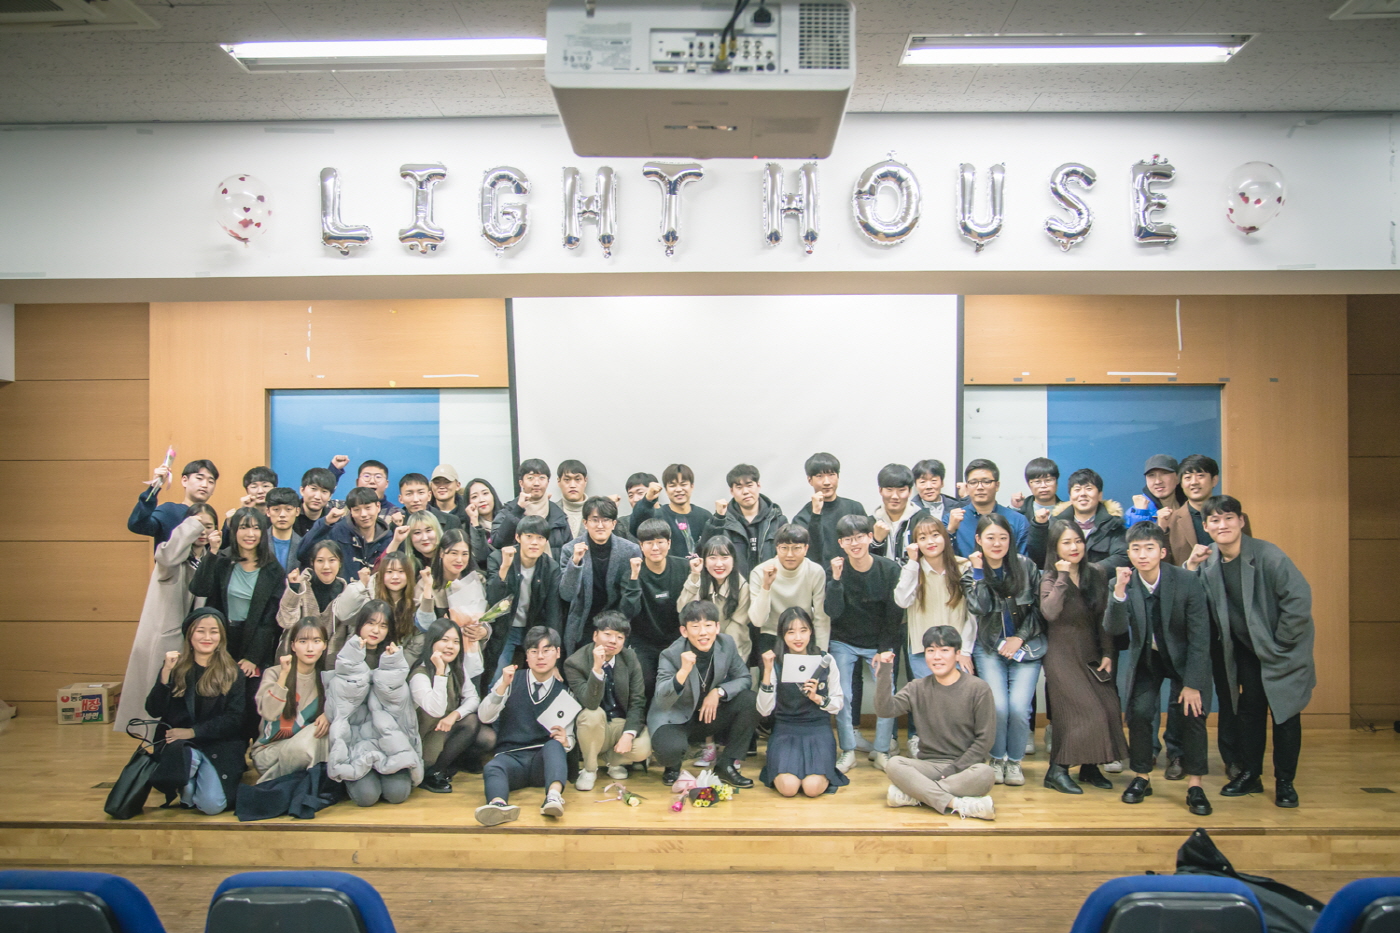 Interview with Inha University  filmmaking club LightHouse!